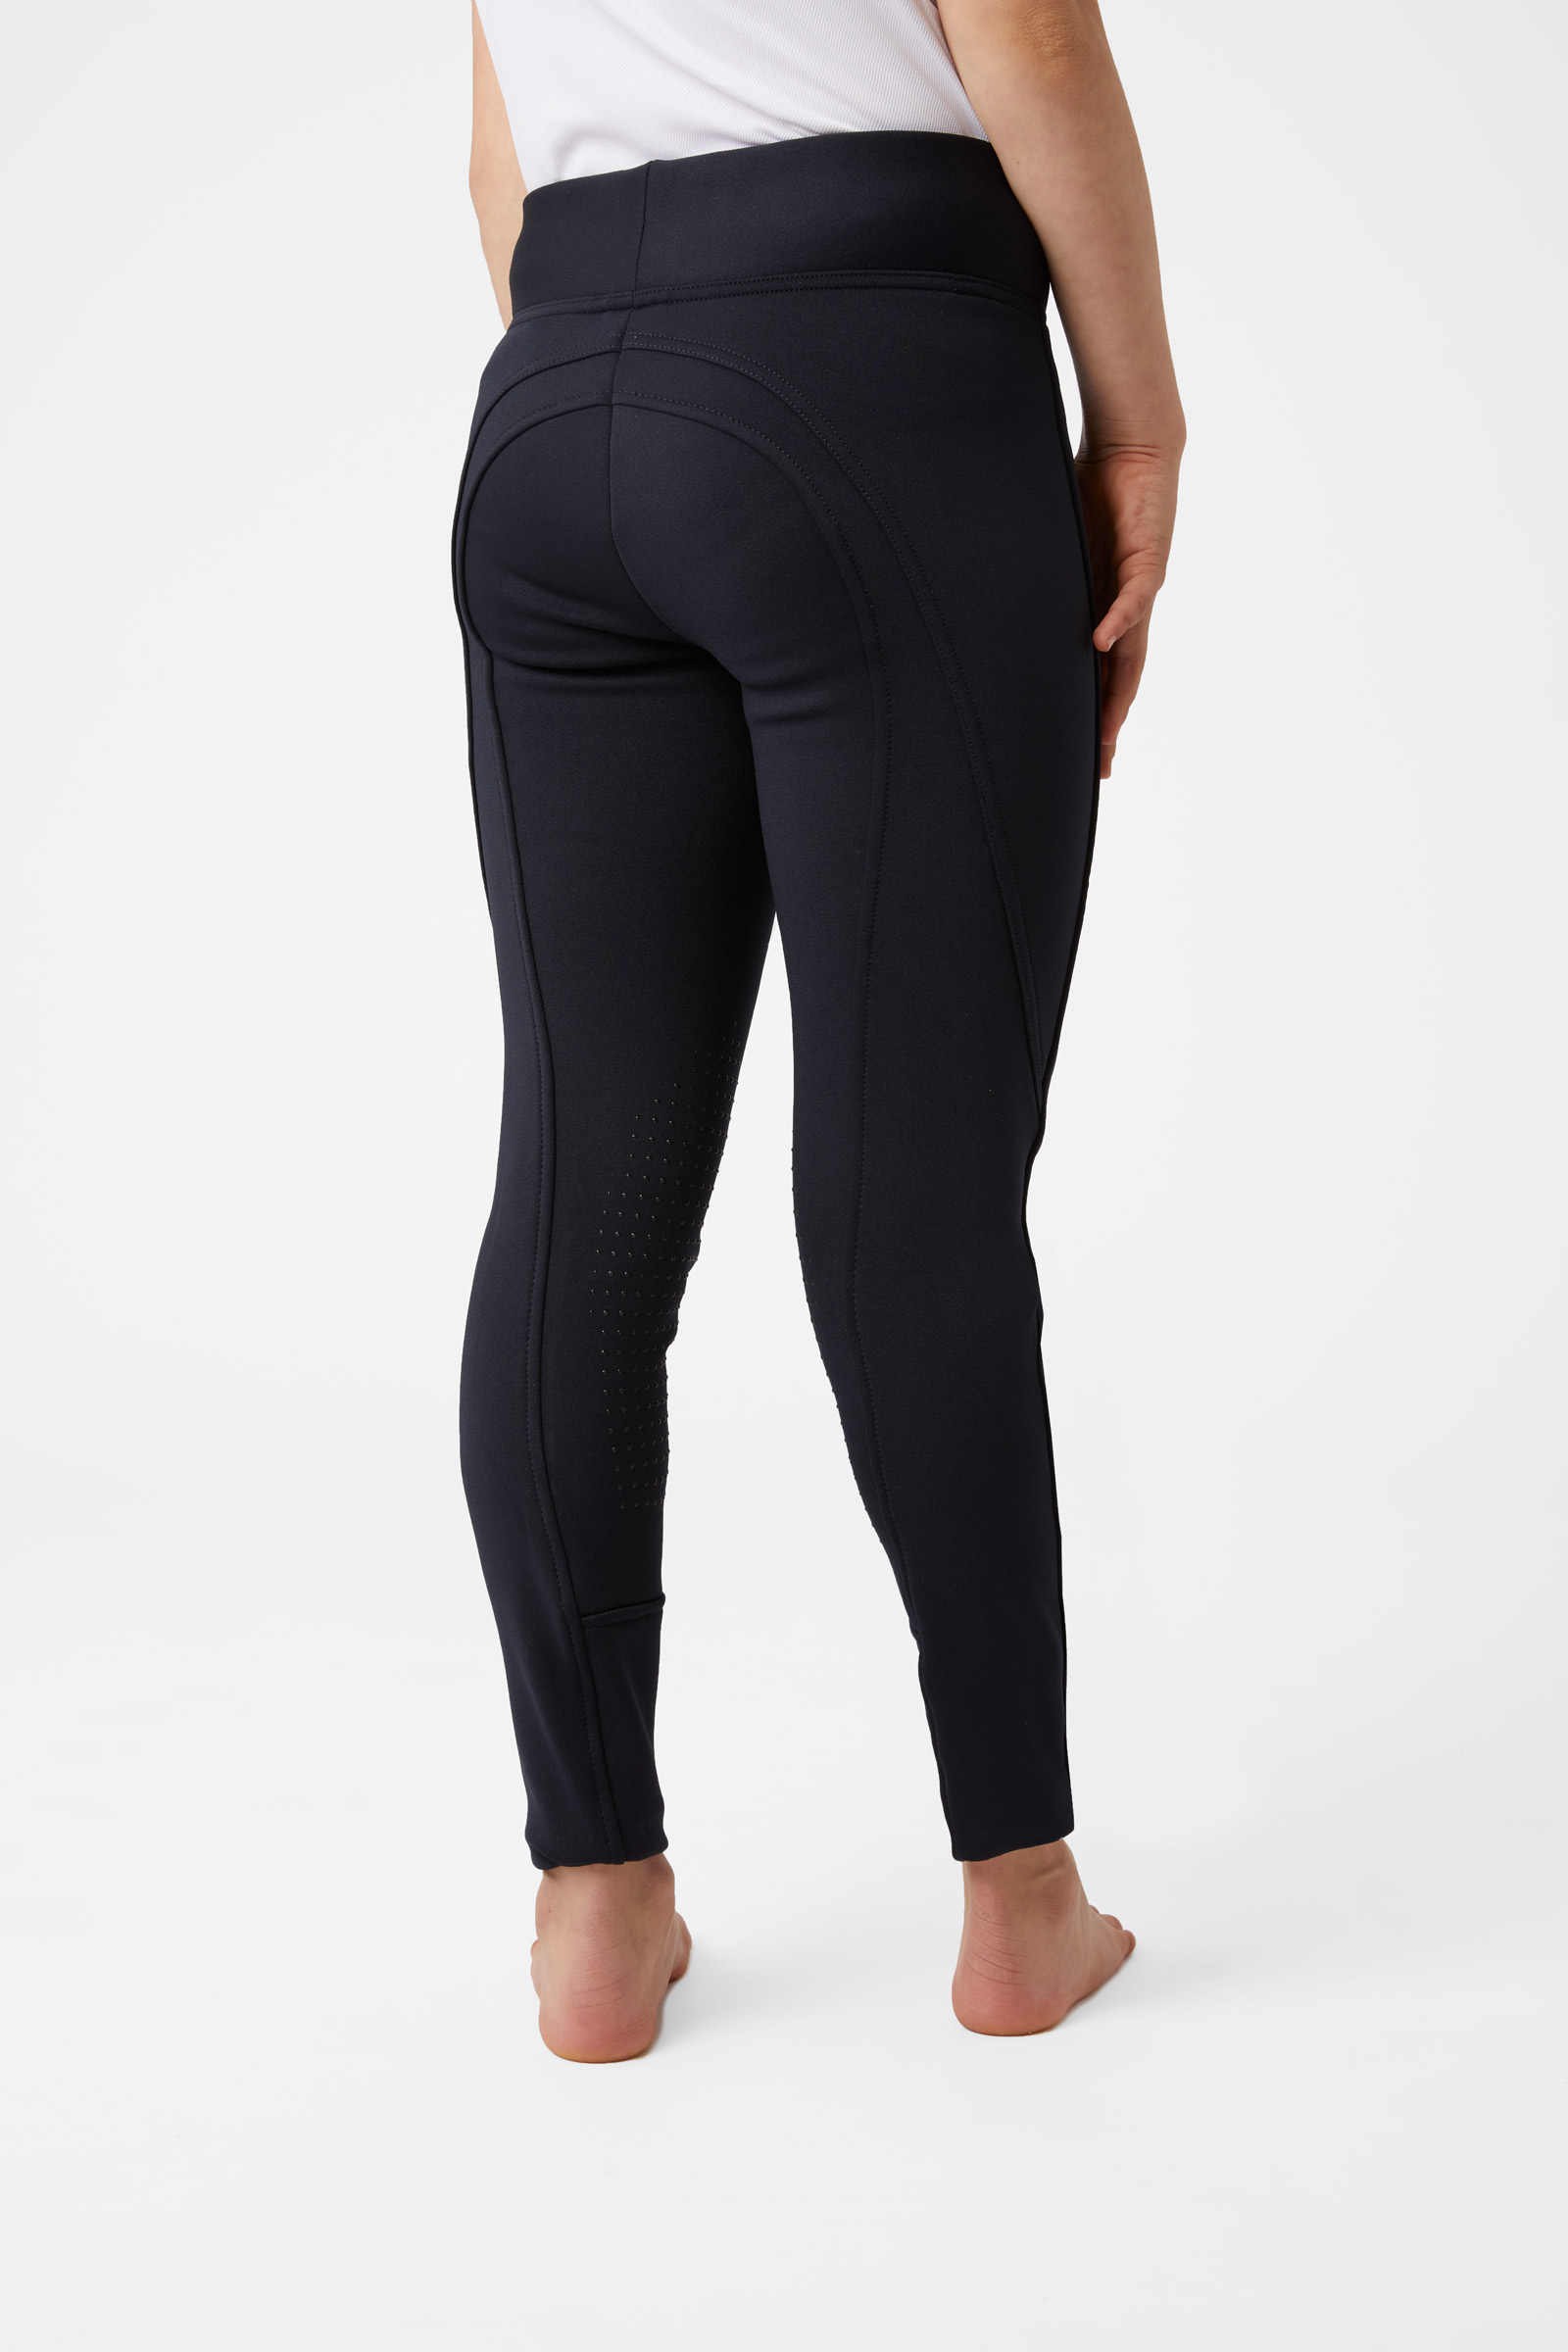 Lululemon All The Right Places Pant Iii